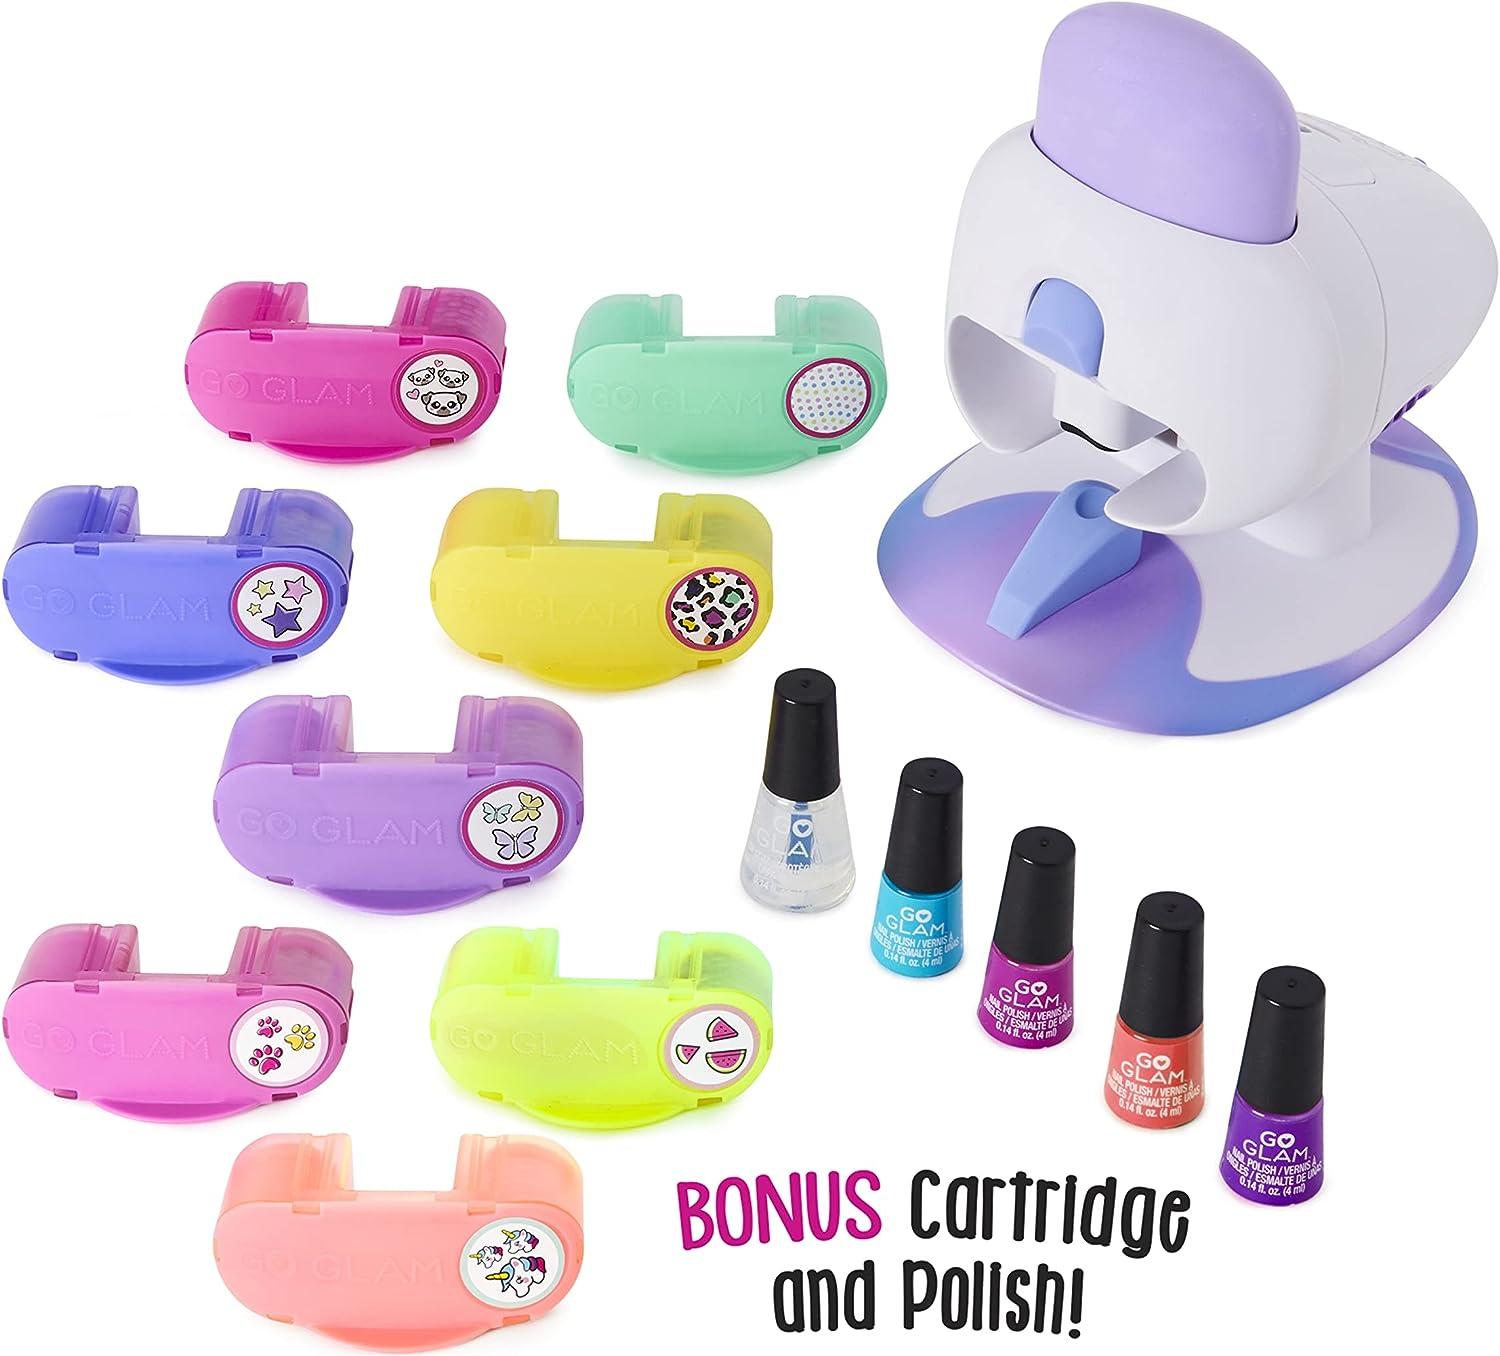 Cool Maker, GO Glam Nail Stamper Salon for Manicures and Pedicures